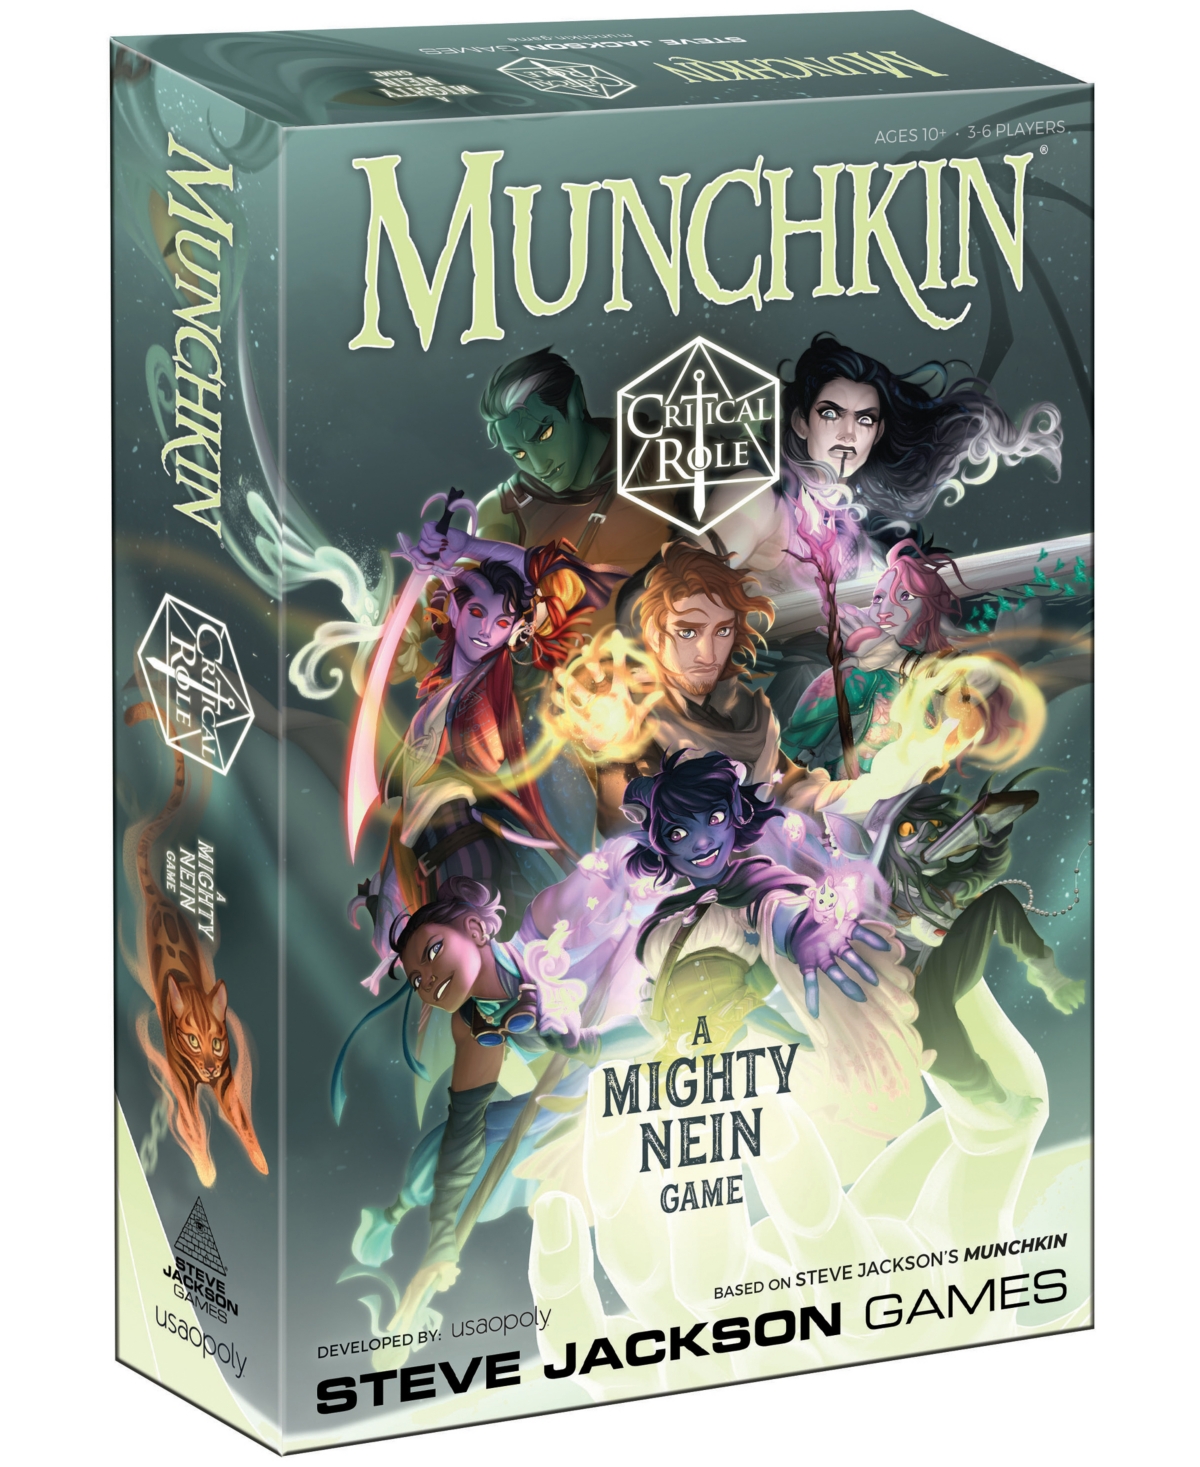 University Games Kids' Usaopoly Munchkin Game Critical Role Edition In No Color